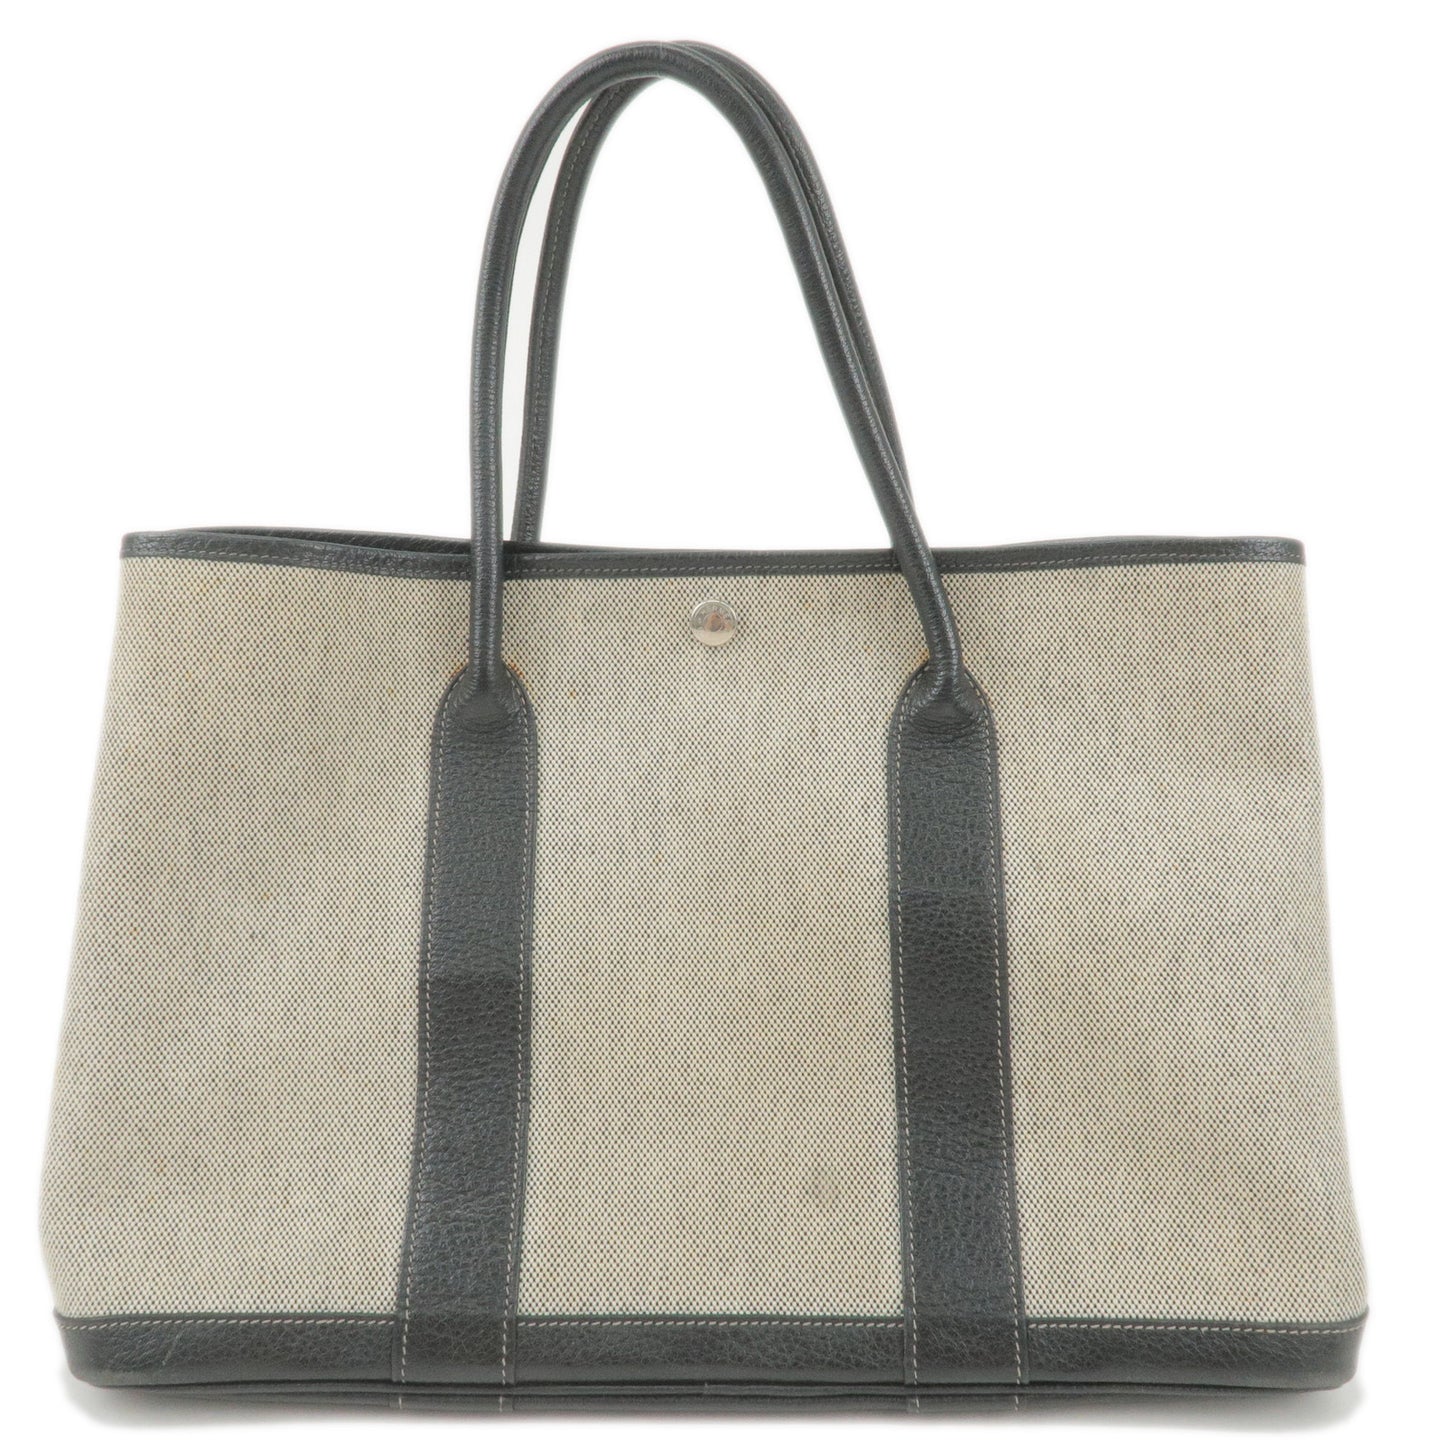 HERMES-Garden-Party-PM-Toile-Ash-Leather-Tote-Bag-Gray-Black